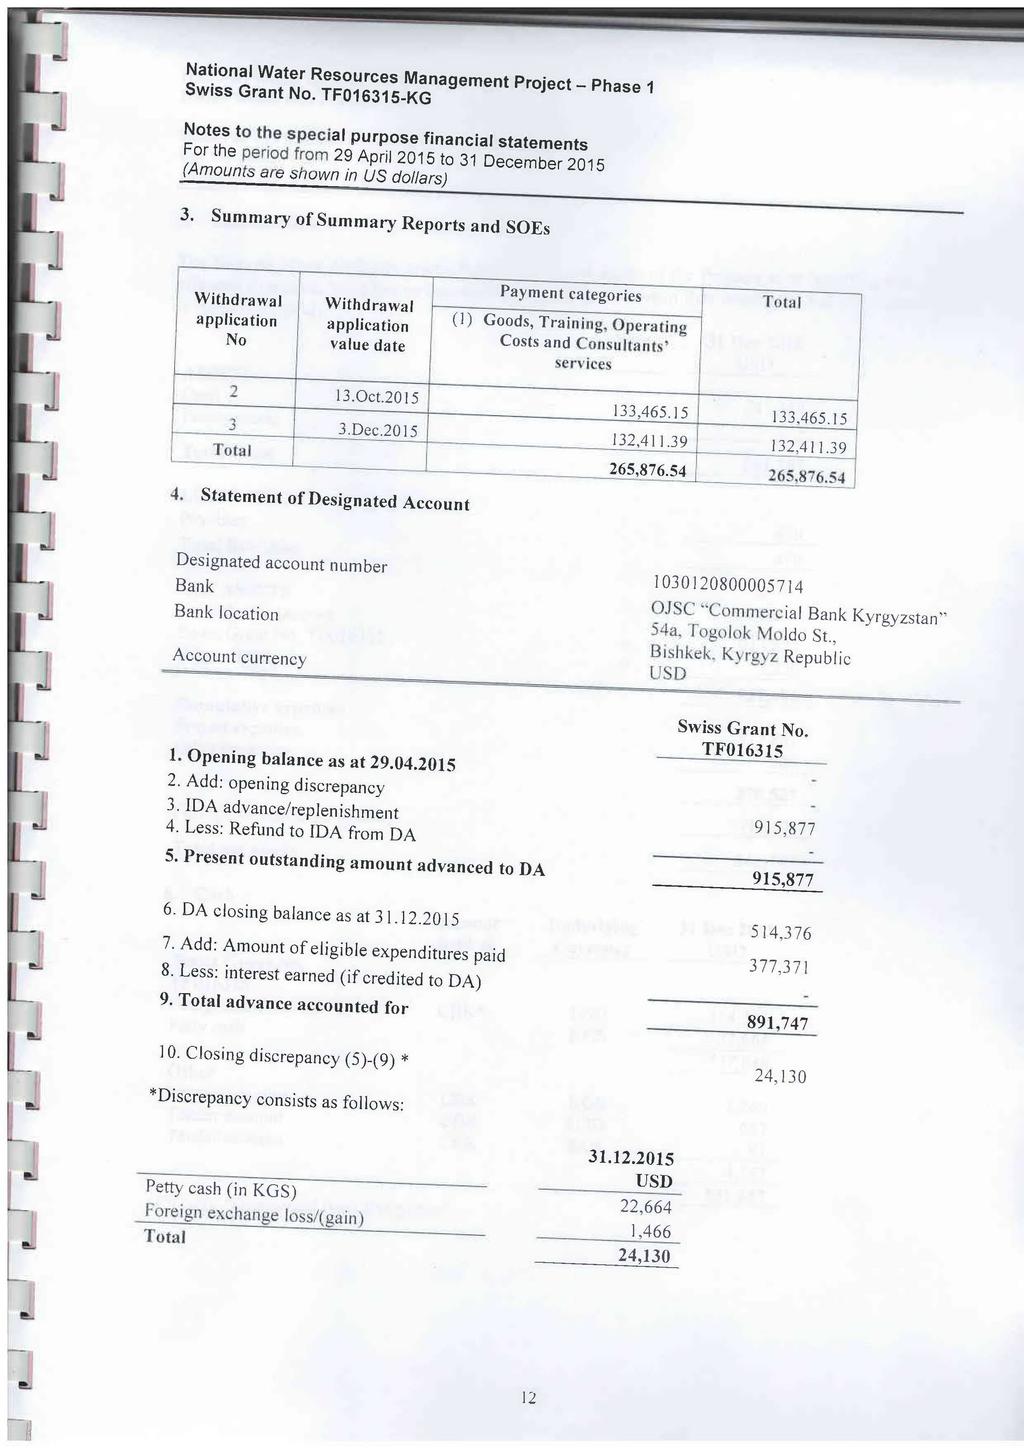 National Water Resources Management Project - Phase I Swiss Grant No. TF016315-KG Notes to the special purpose financial statements (Amounts are shown in US dollars) 3.